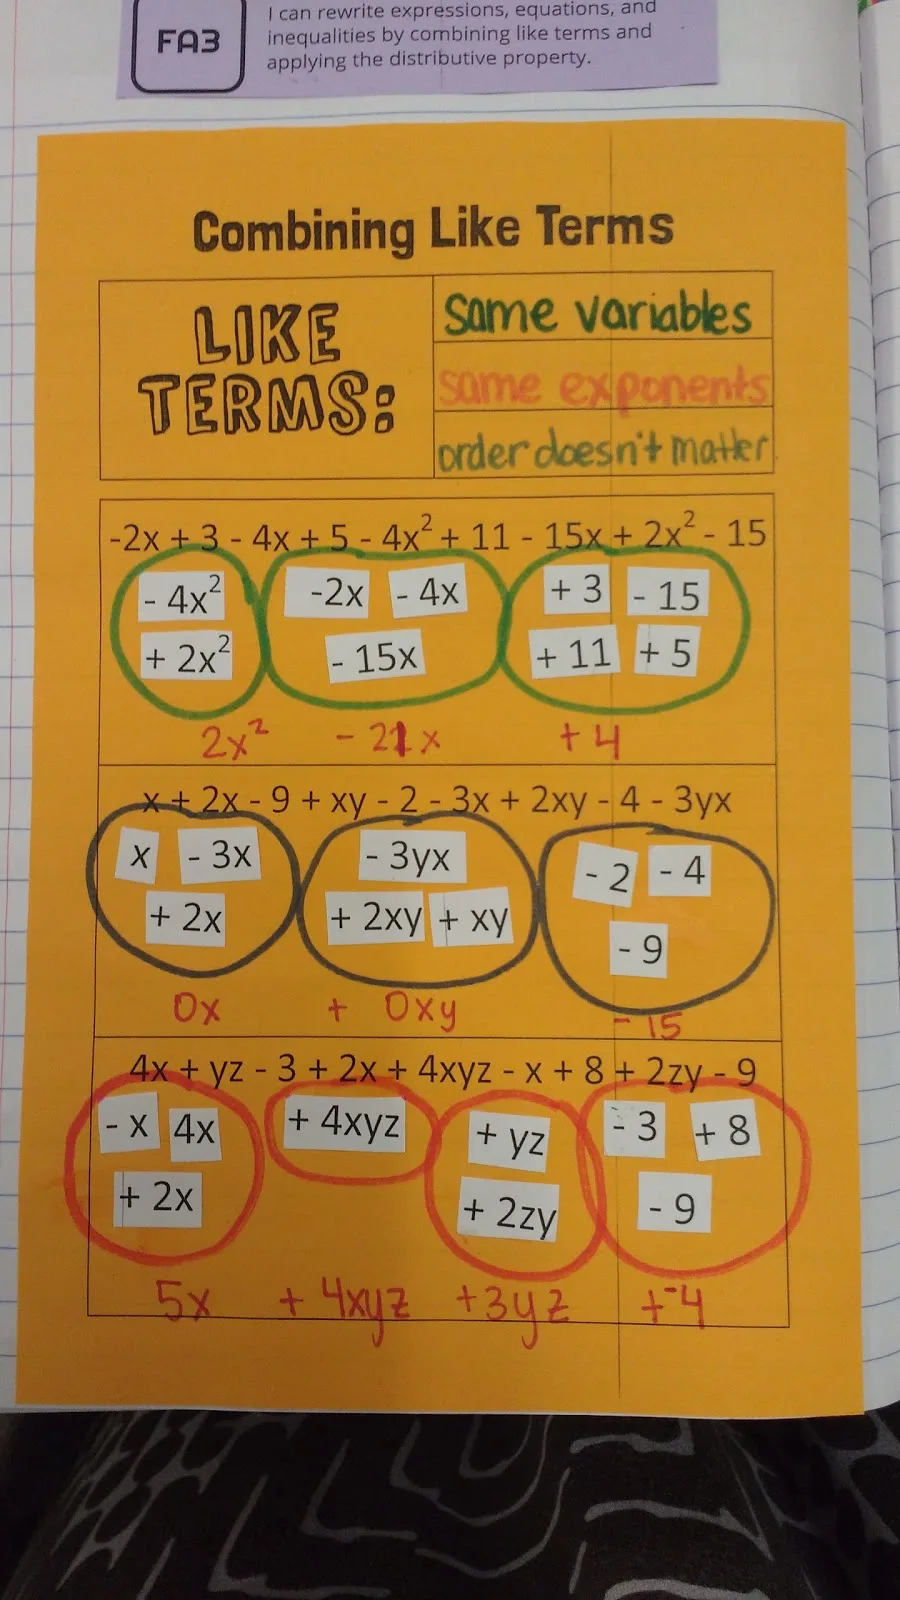 Combining Like Terms Cut and Paste Activity